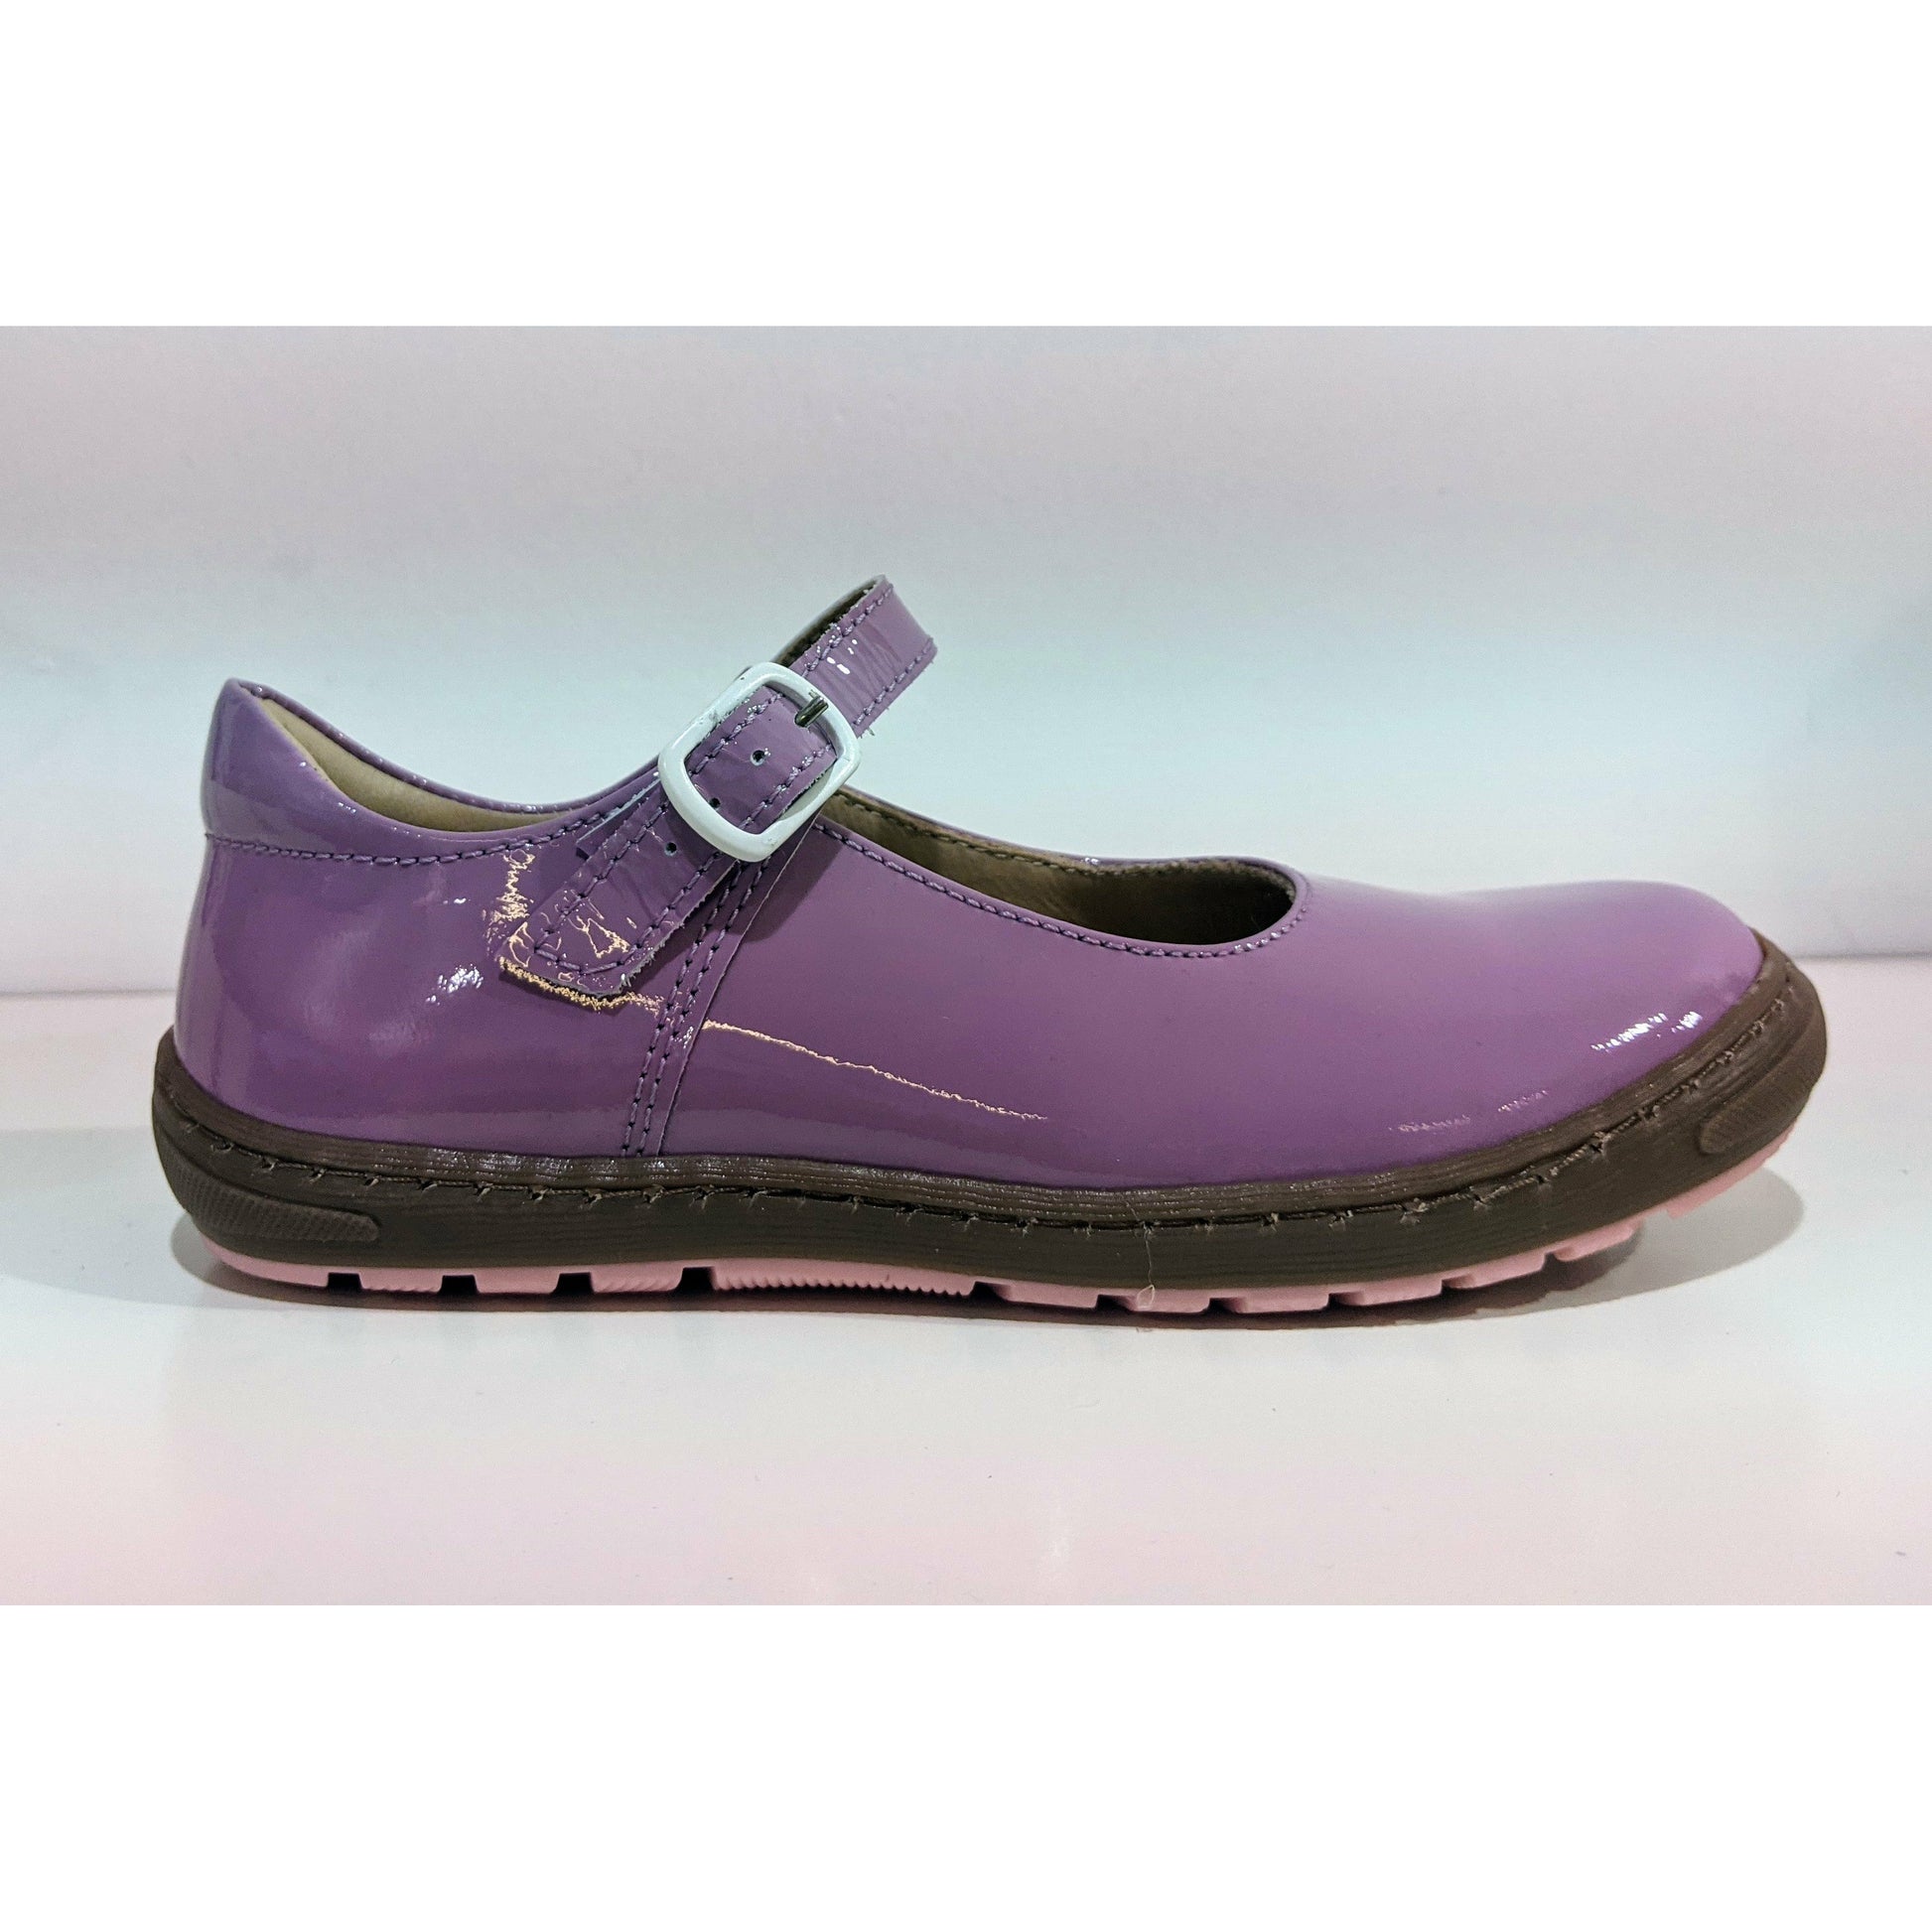 A girls Mary Jane shoe by Petasil ,style Joana, in lilac patent with buckle fastening. Right side view.